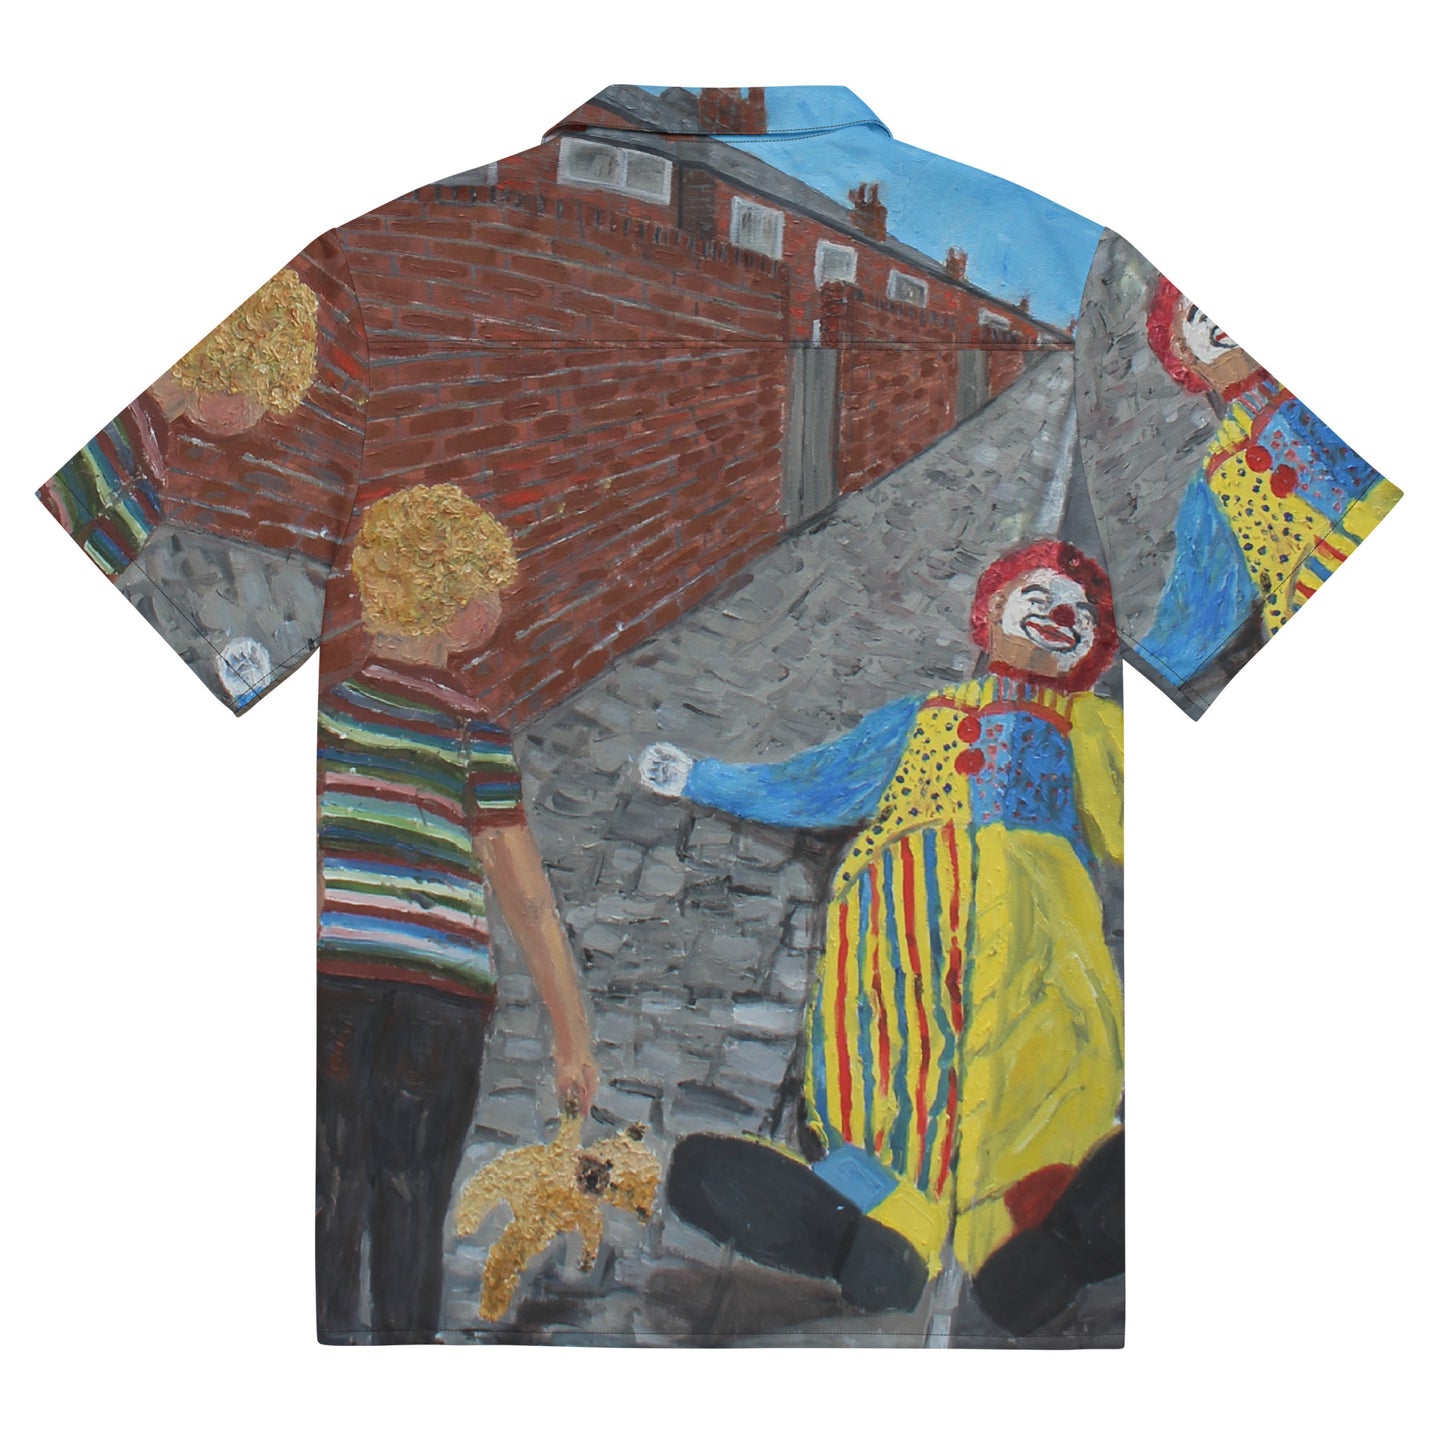 There's a Clown in the Entry  - Unisex button shirt